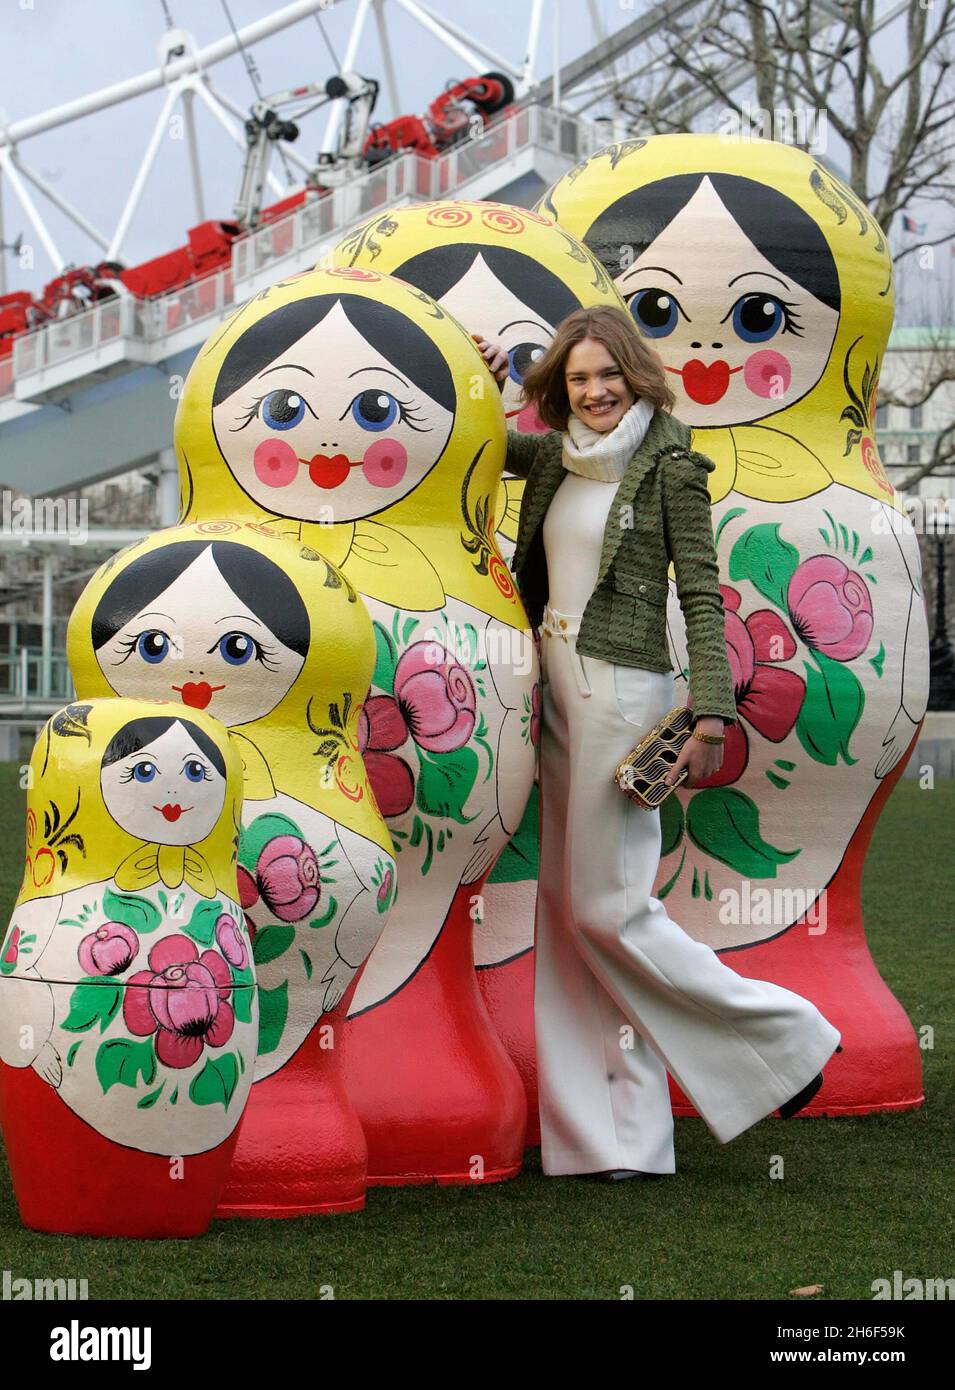 Five large-scale Russian nesting dolls, known as Matryoshka, are unveiled  by London-based Russian supermodel Natalia Vodianova beside the British  Airways London Eye, London. The fourth annual Russian Winter Festival, a  celebration of